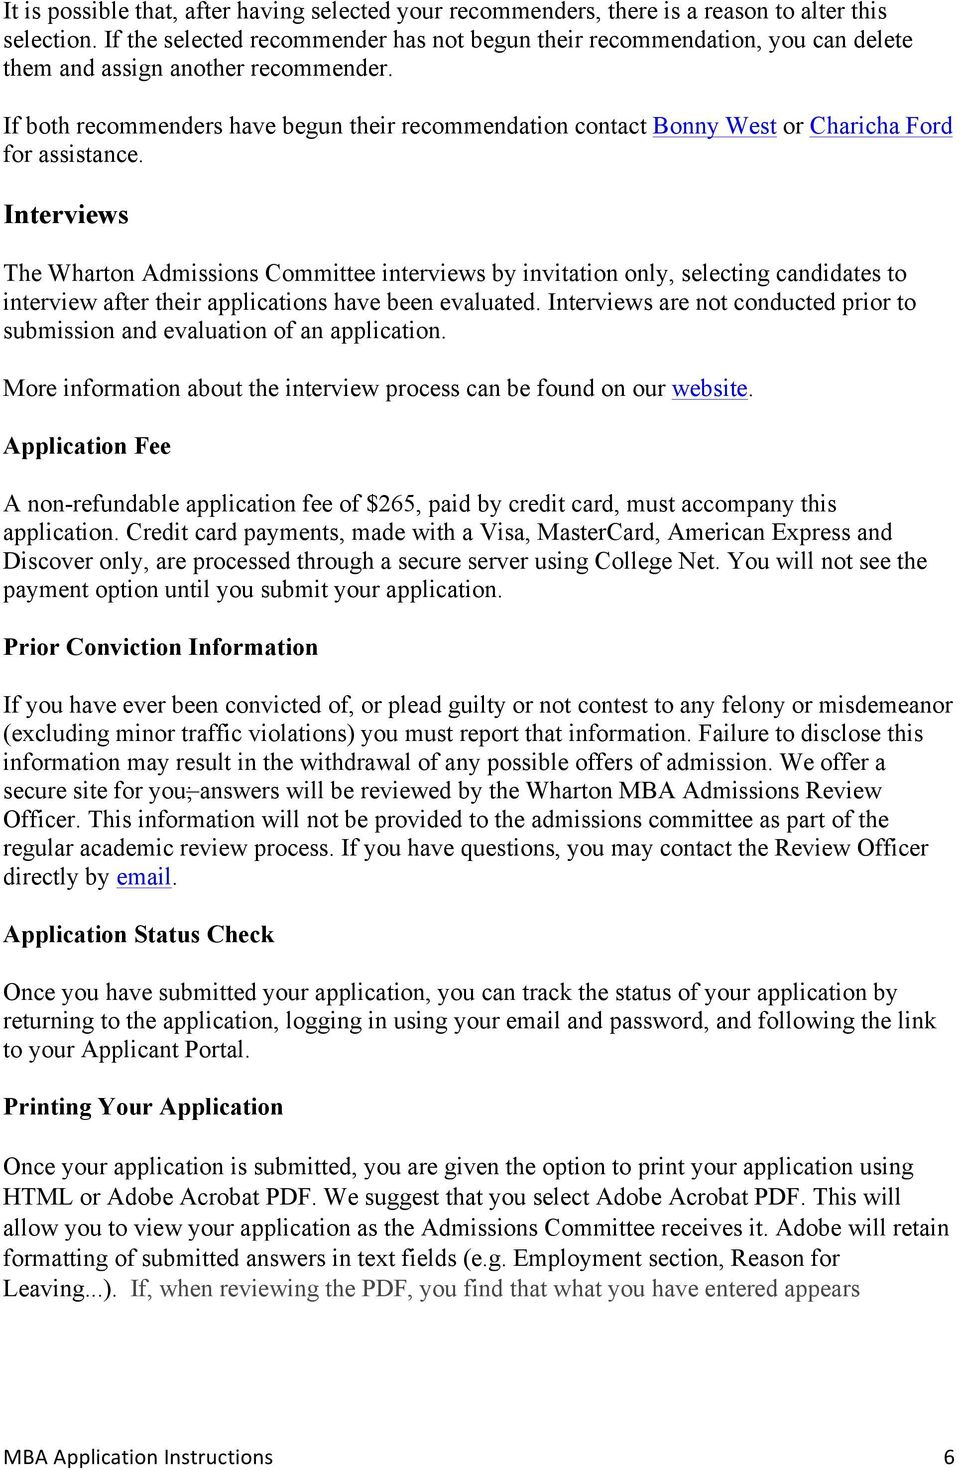 Wharton Mba Application Instructions Pdf Free Download for proportions 960 X 1470